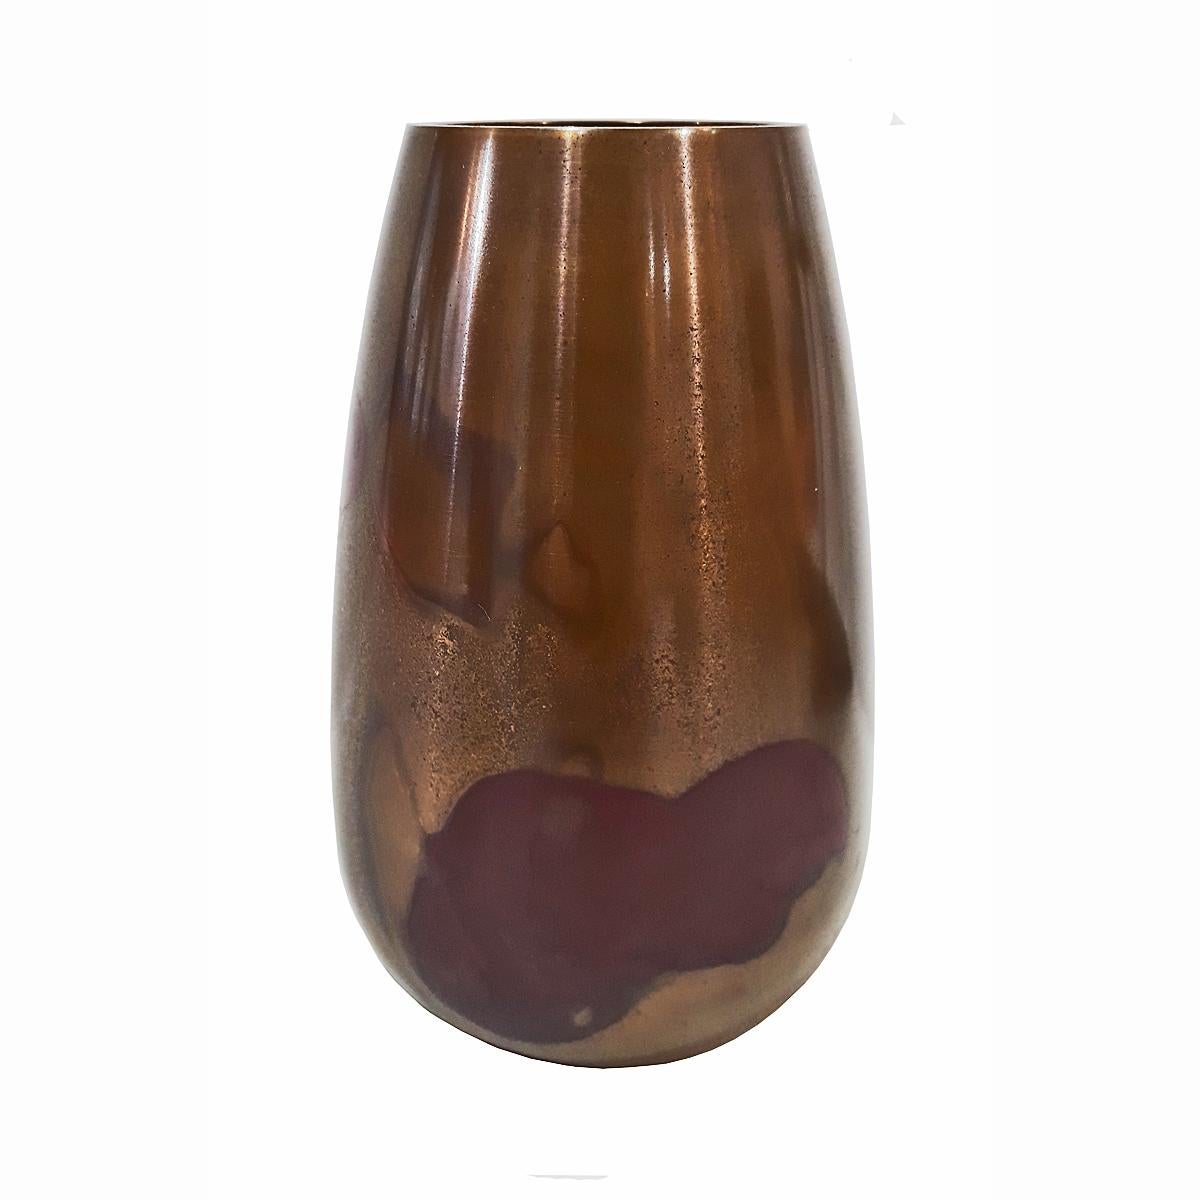 A small polished bronze vase for Ikebana, circa 1925. Japan, Showa period. 

Its simple lines reflect Japanese design. The finishing is Murashido red-oil technique, a centuries-old method by which the vase is dipped in hot oil to give it a